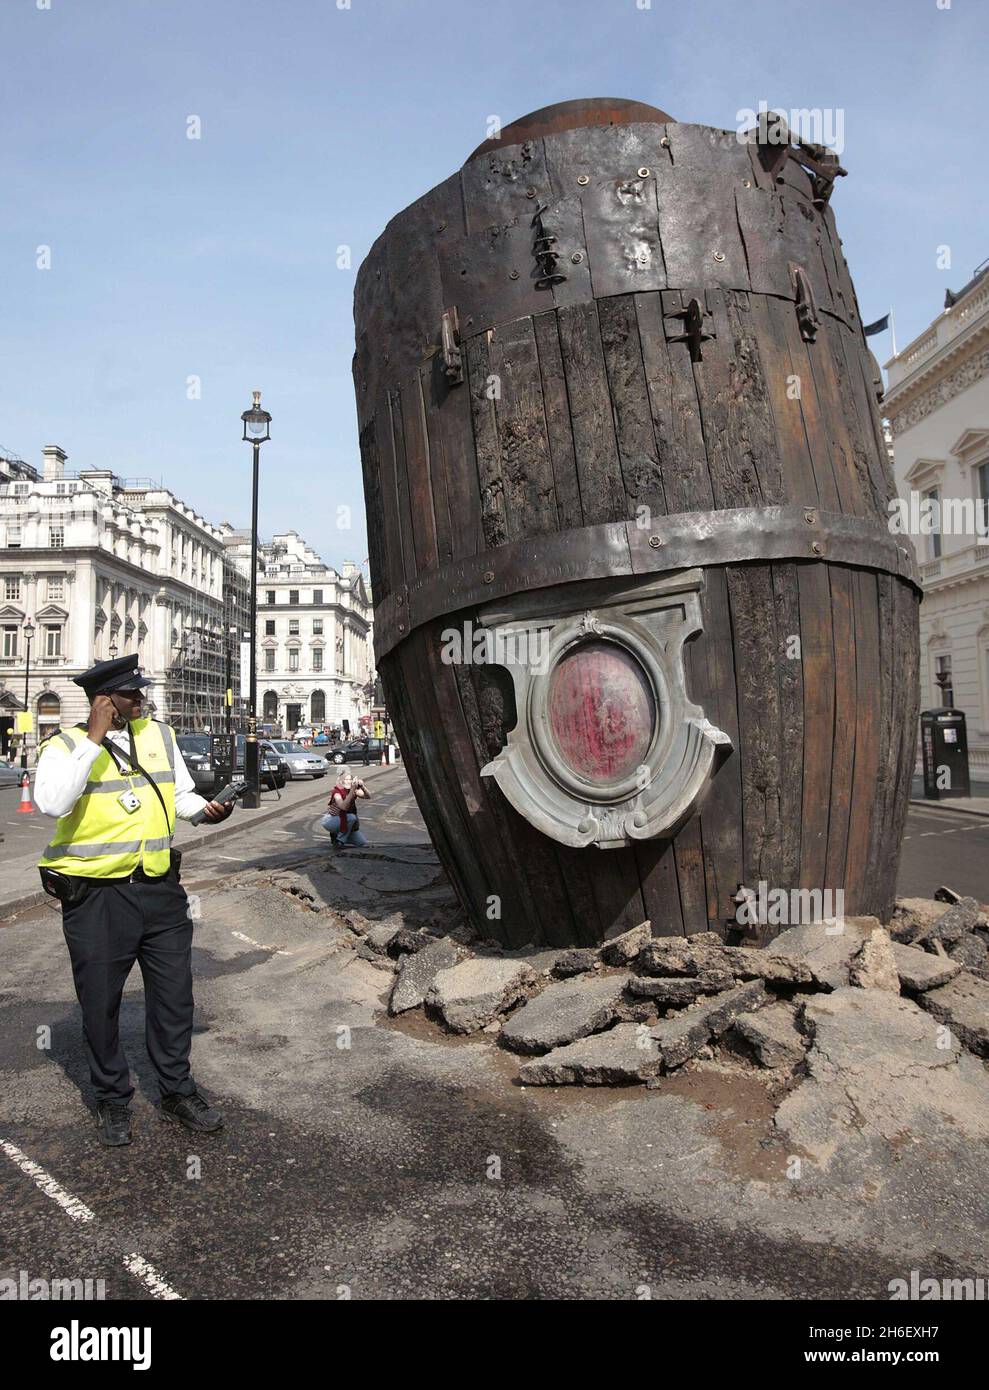 A giant smoking rocket was buried in the street in Waterloo place, London. Part of The Sultan's Elephant, a street theatre show by French company Royal De Luxe. Stock Photo